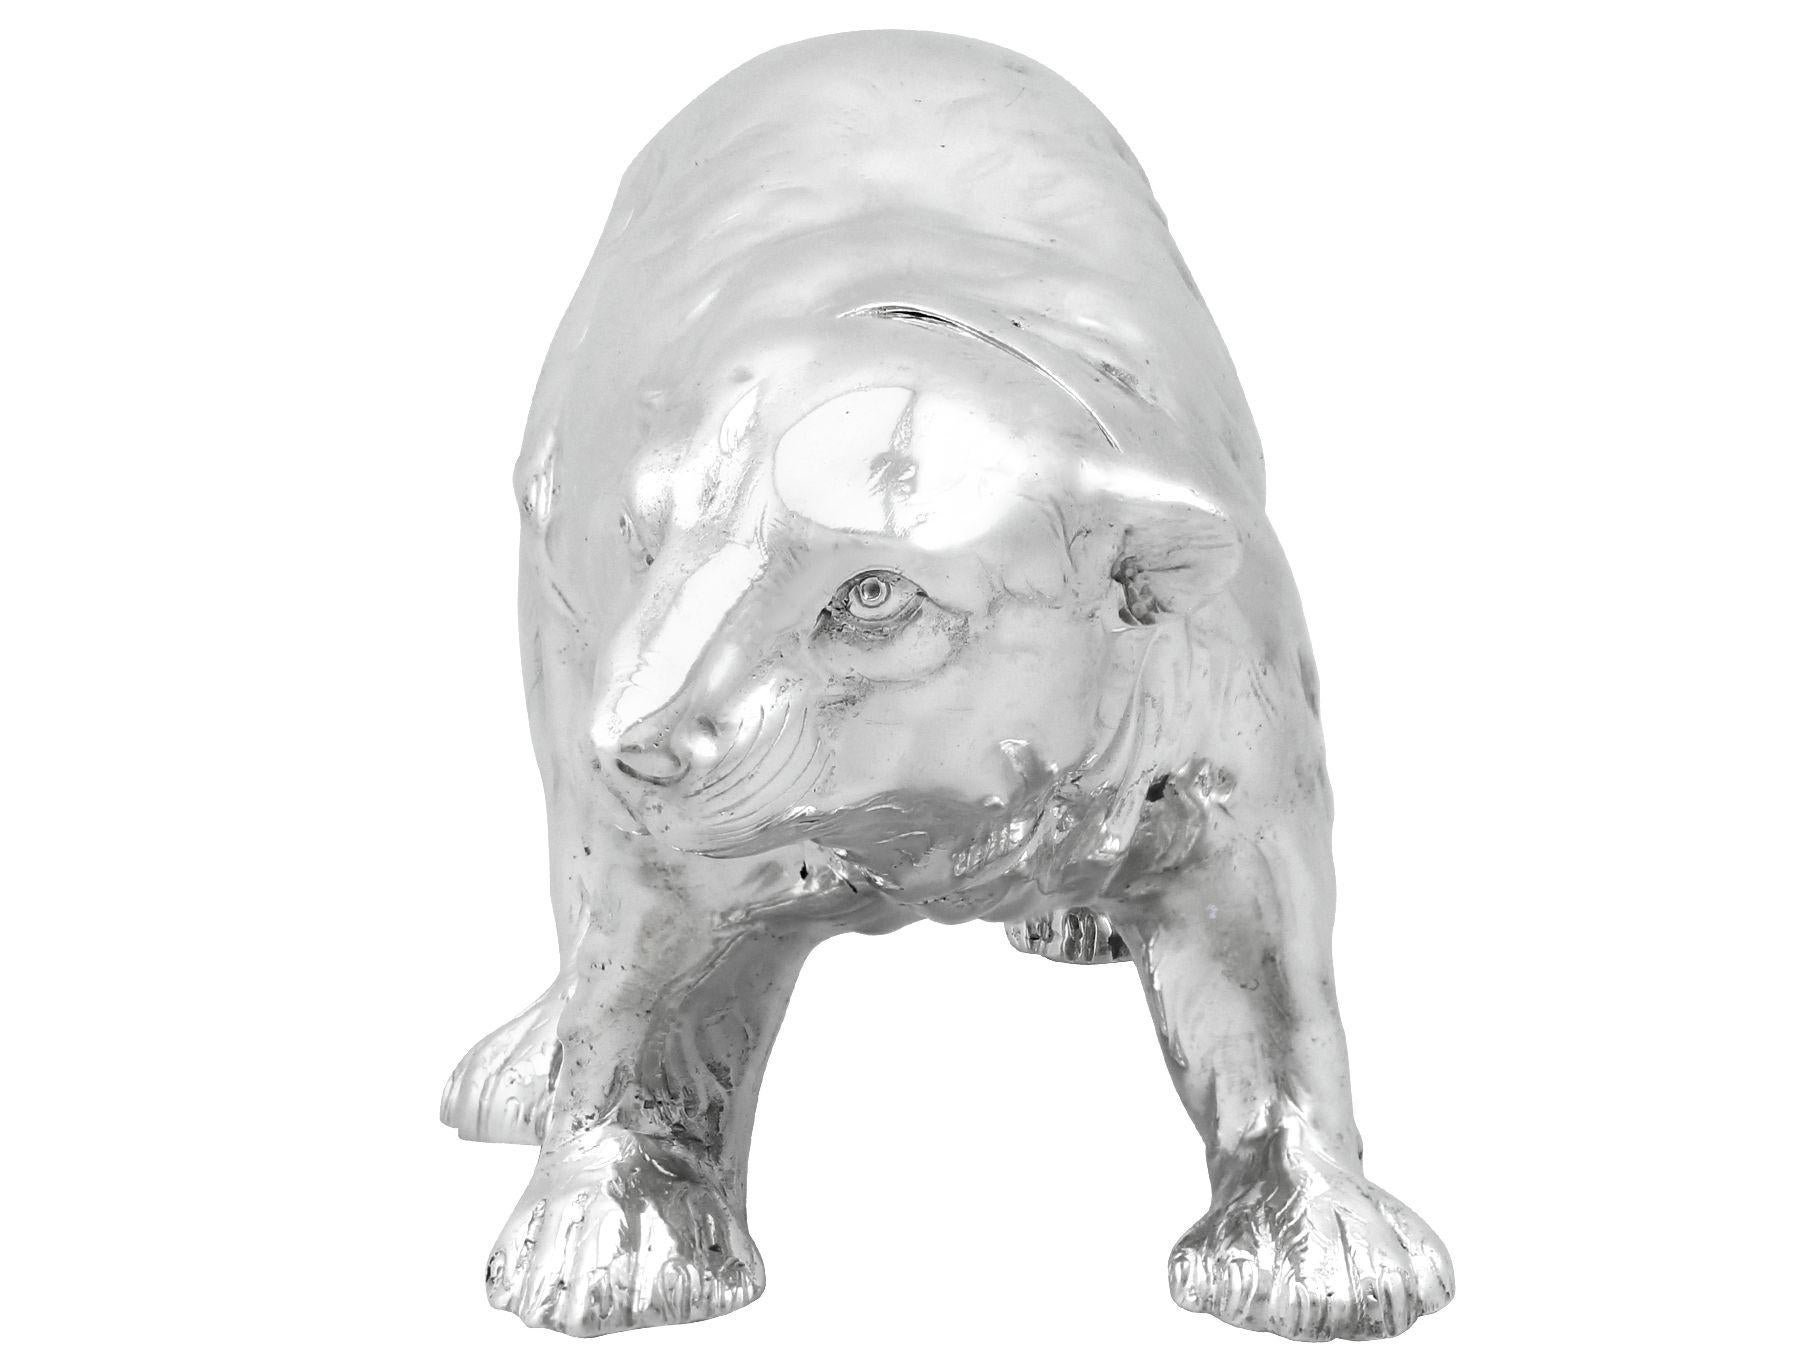 An exceptional, fine and impressive, rare antique German silver bear sugar box; part of our continental ornamental silverware collection

This exceptional and rare antique German silver sugar box have been realistically modelled in form of a